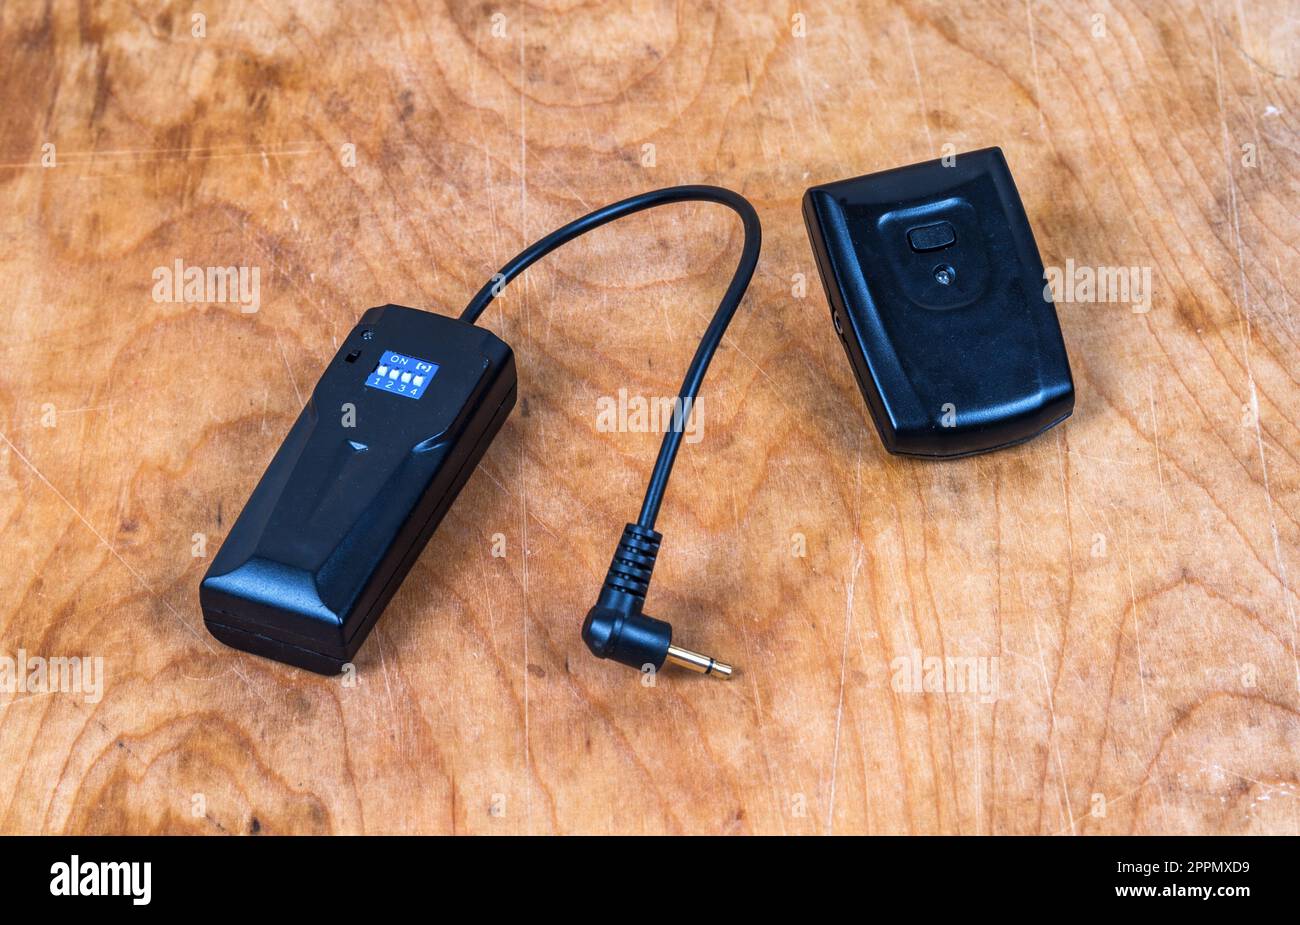 Studio flash transmitter and receiver on table Stock Photo